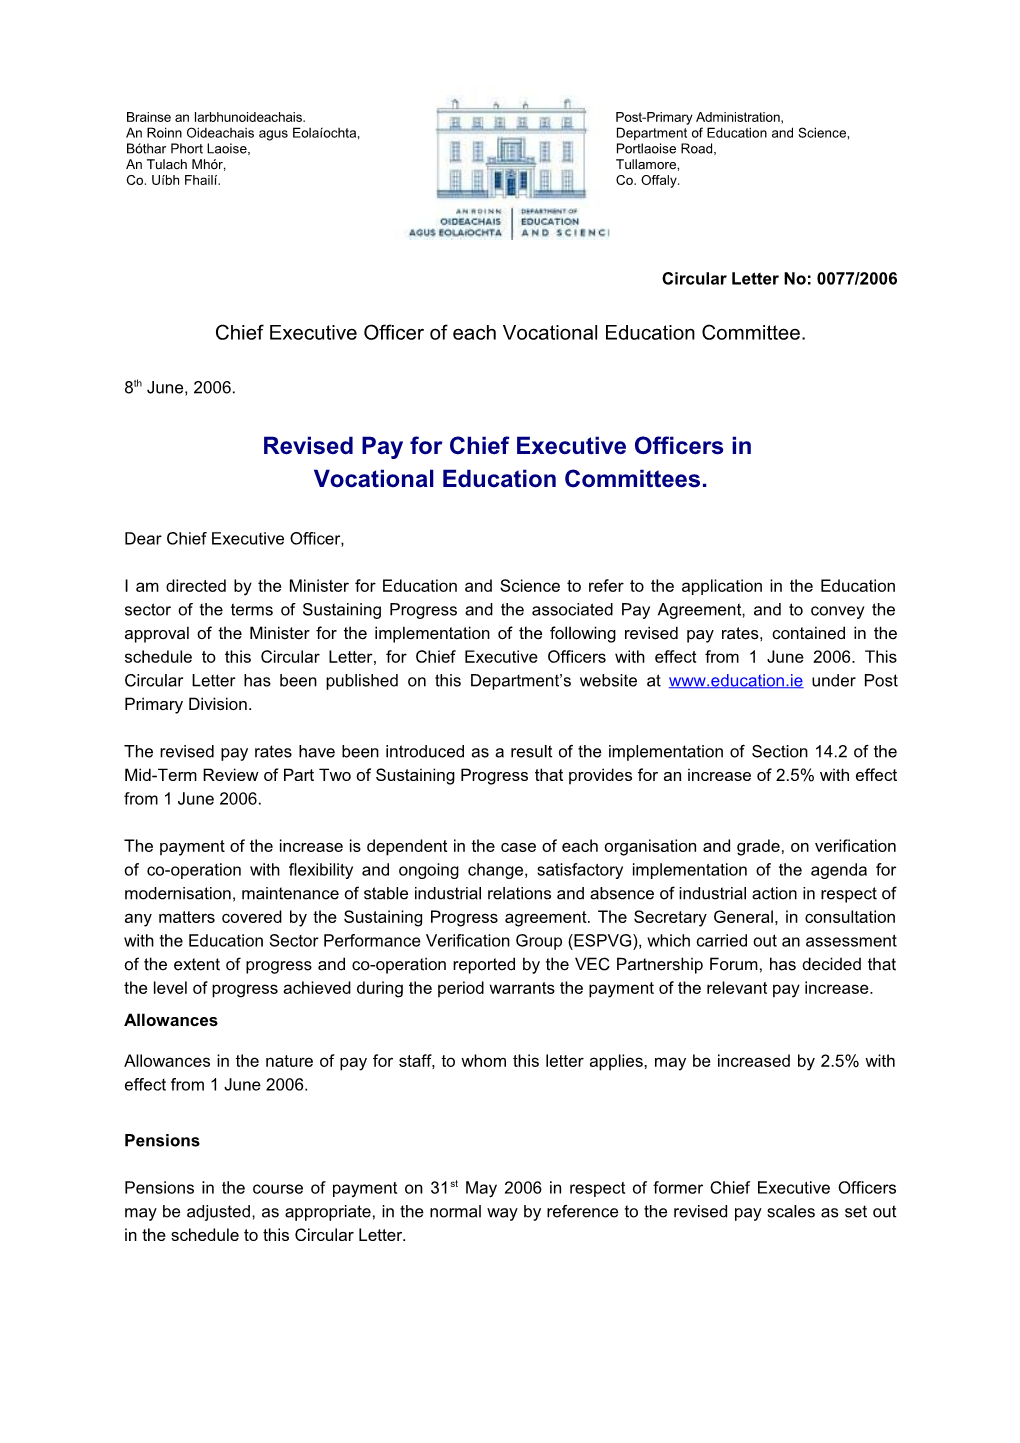 Revised Pay for Chief Executive Officers In